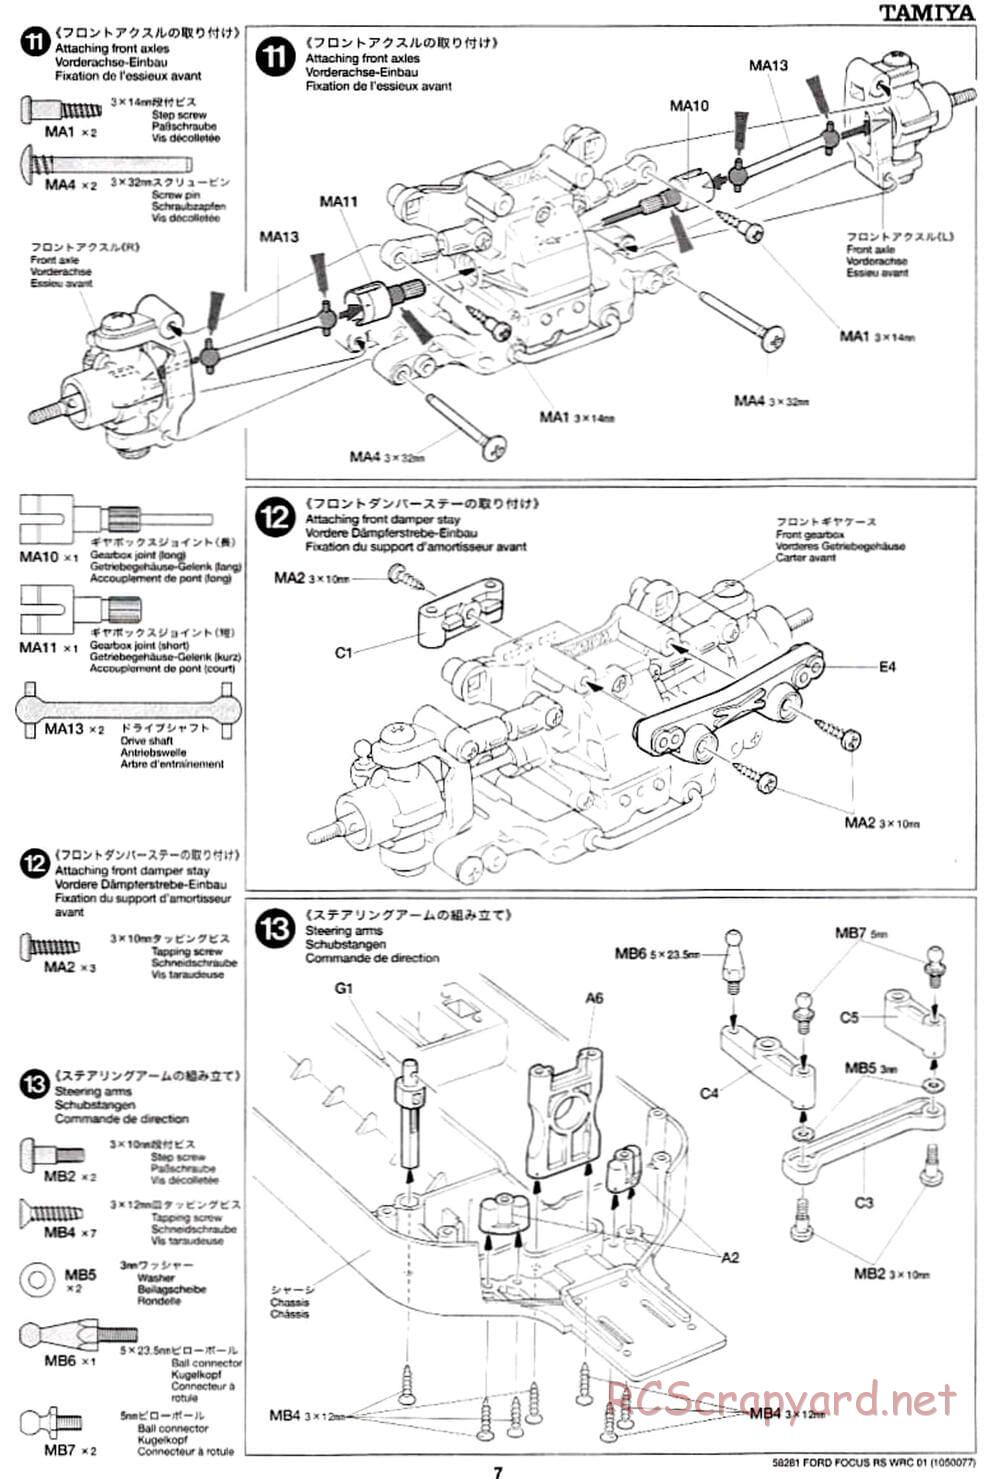 Tamiya - Ford Focus RS WRC 01 - TB-01 Chassis - Manual - Page 7